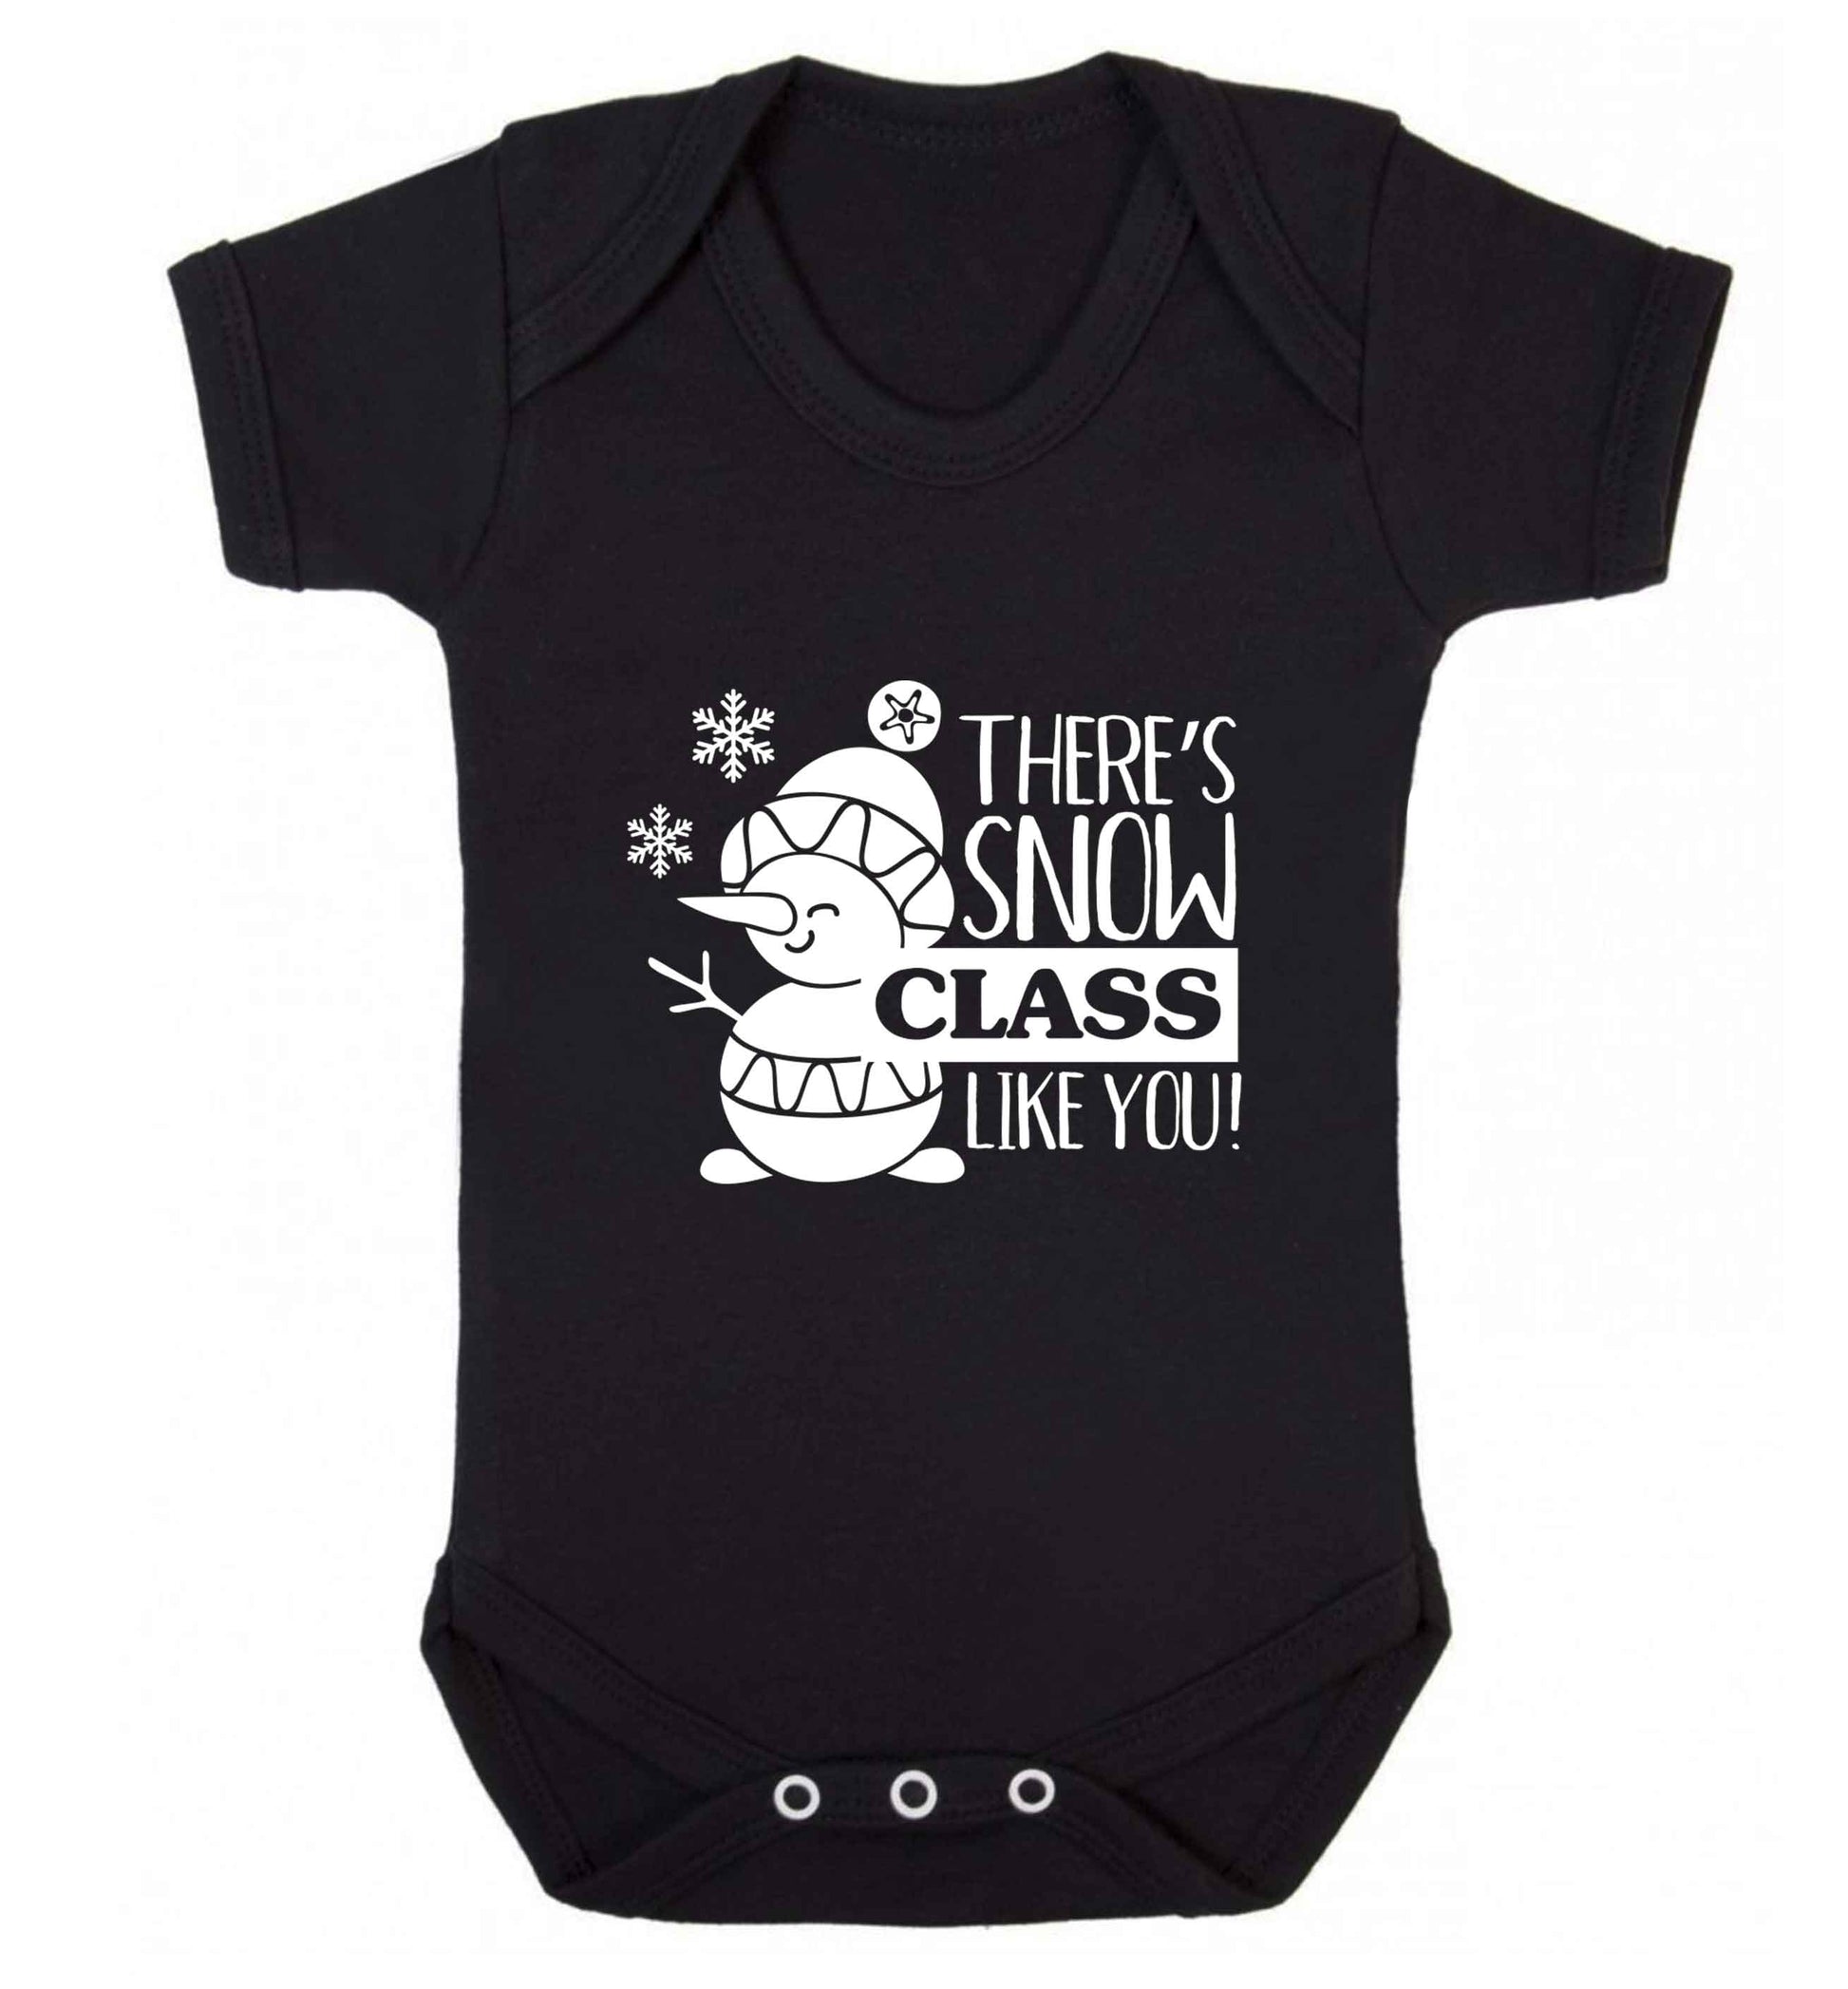 There's snow class like you baby vest black 18-24 months